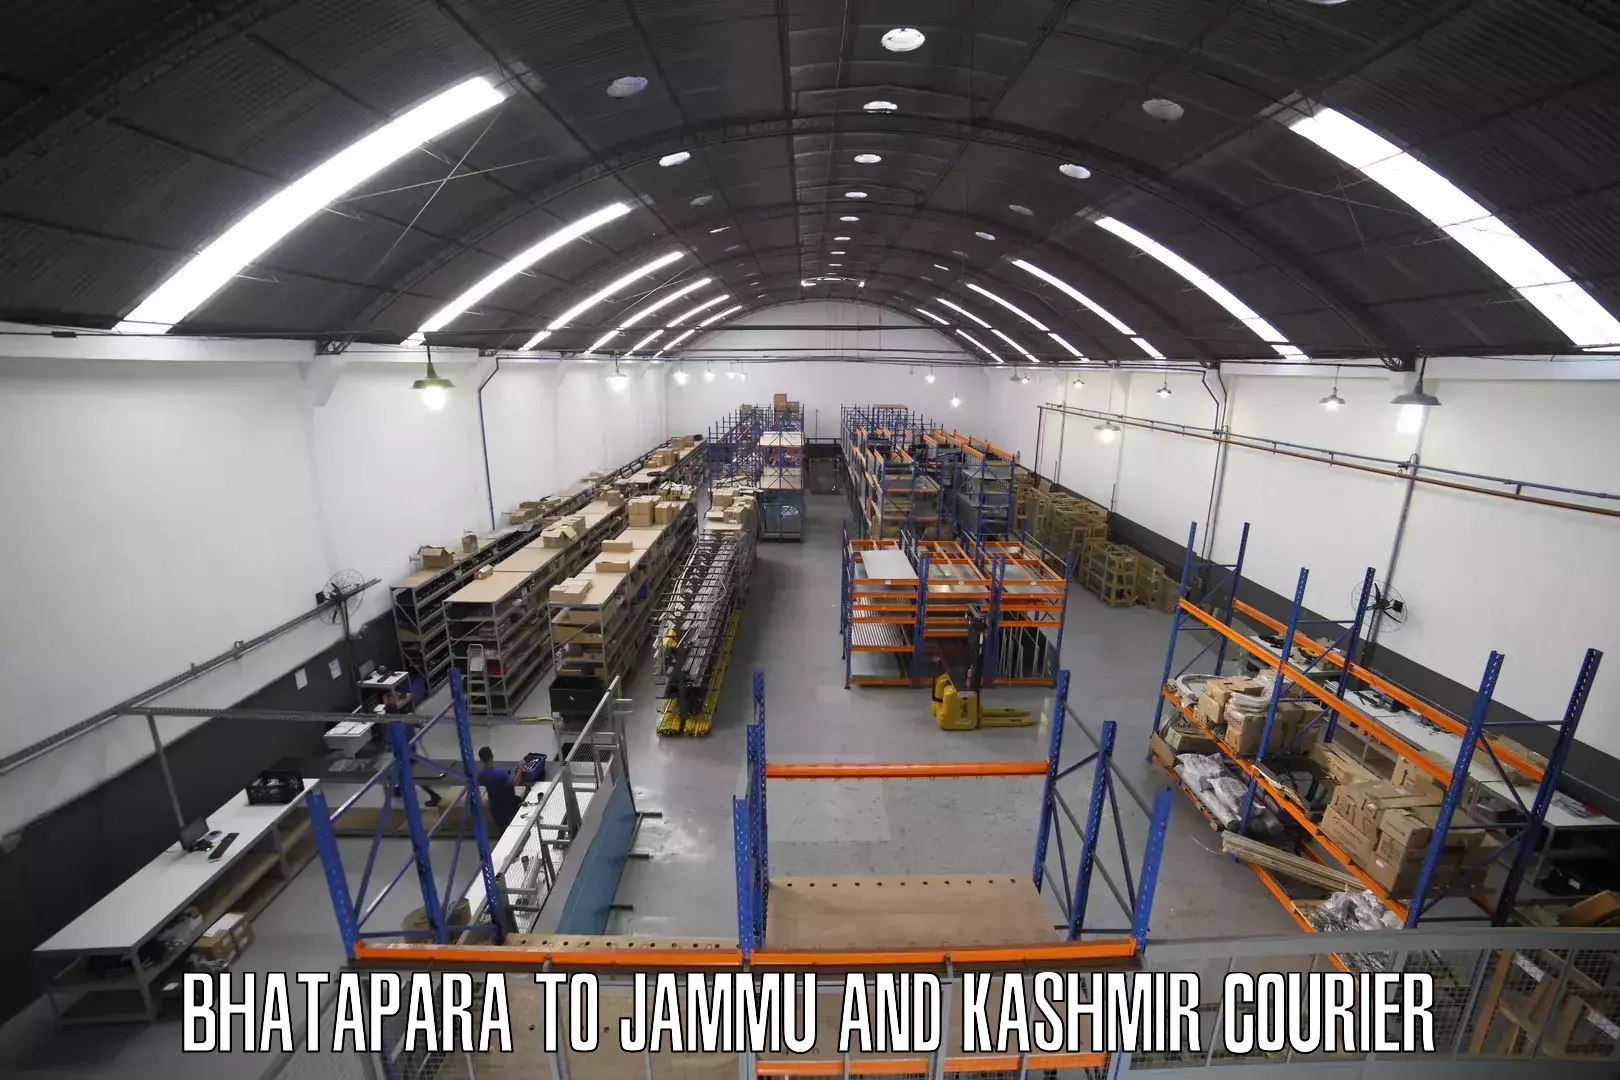 Nationwide delivery network Bhatapara to Jammu and Kashmir